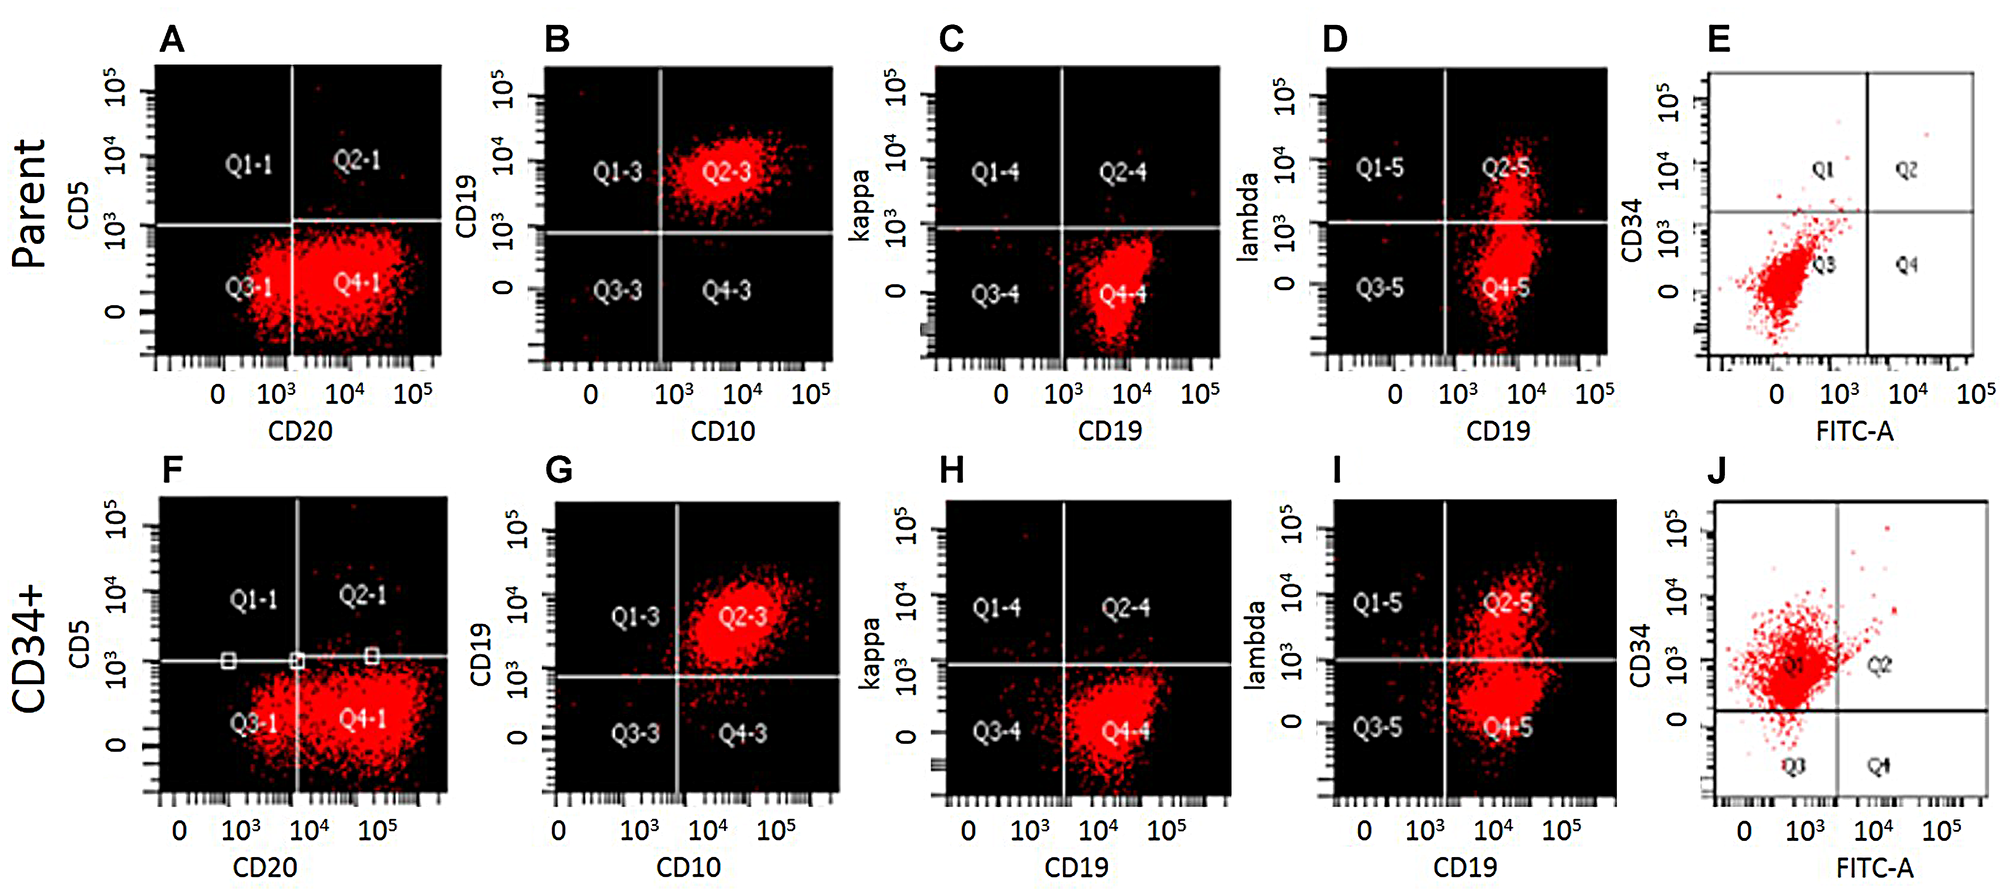 Phenotypic characterization of WSU-WM-CD34+ subset cells.